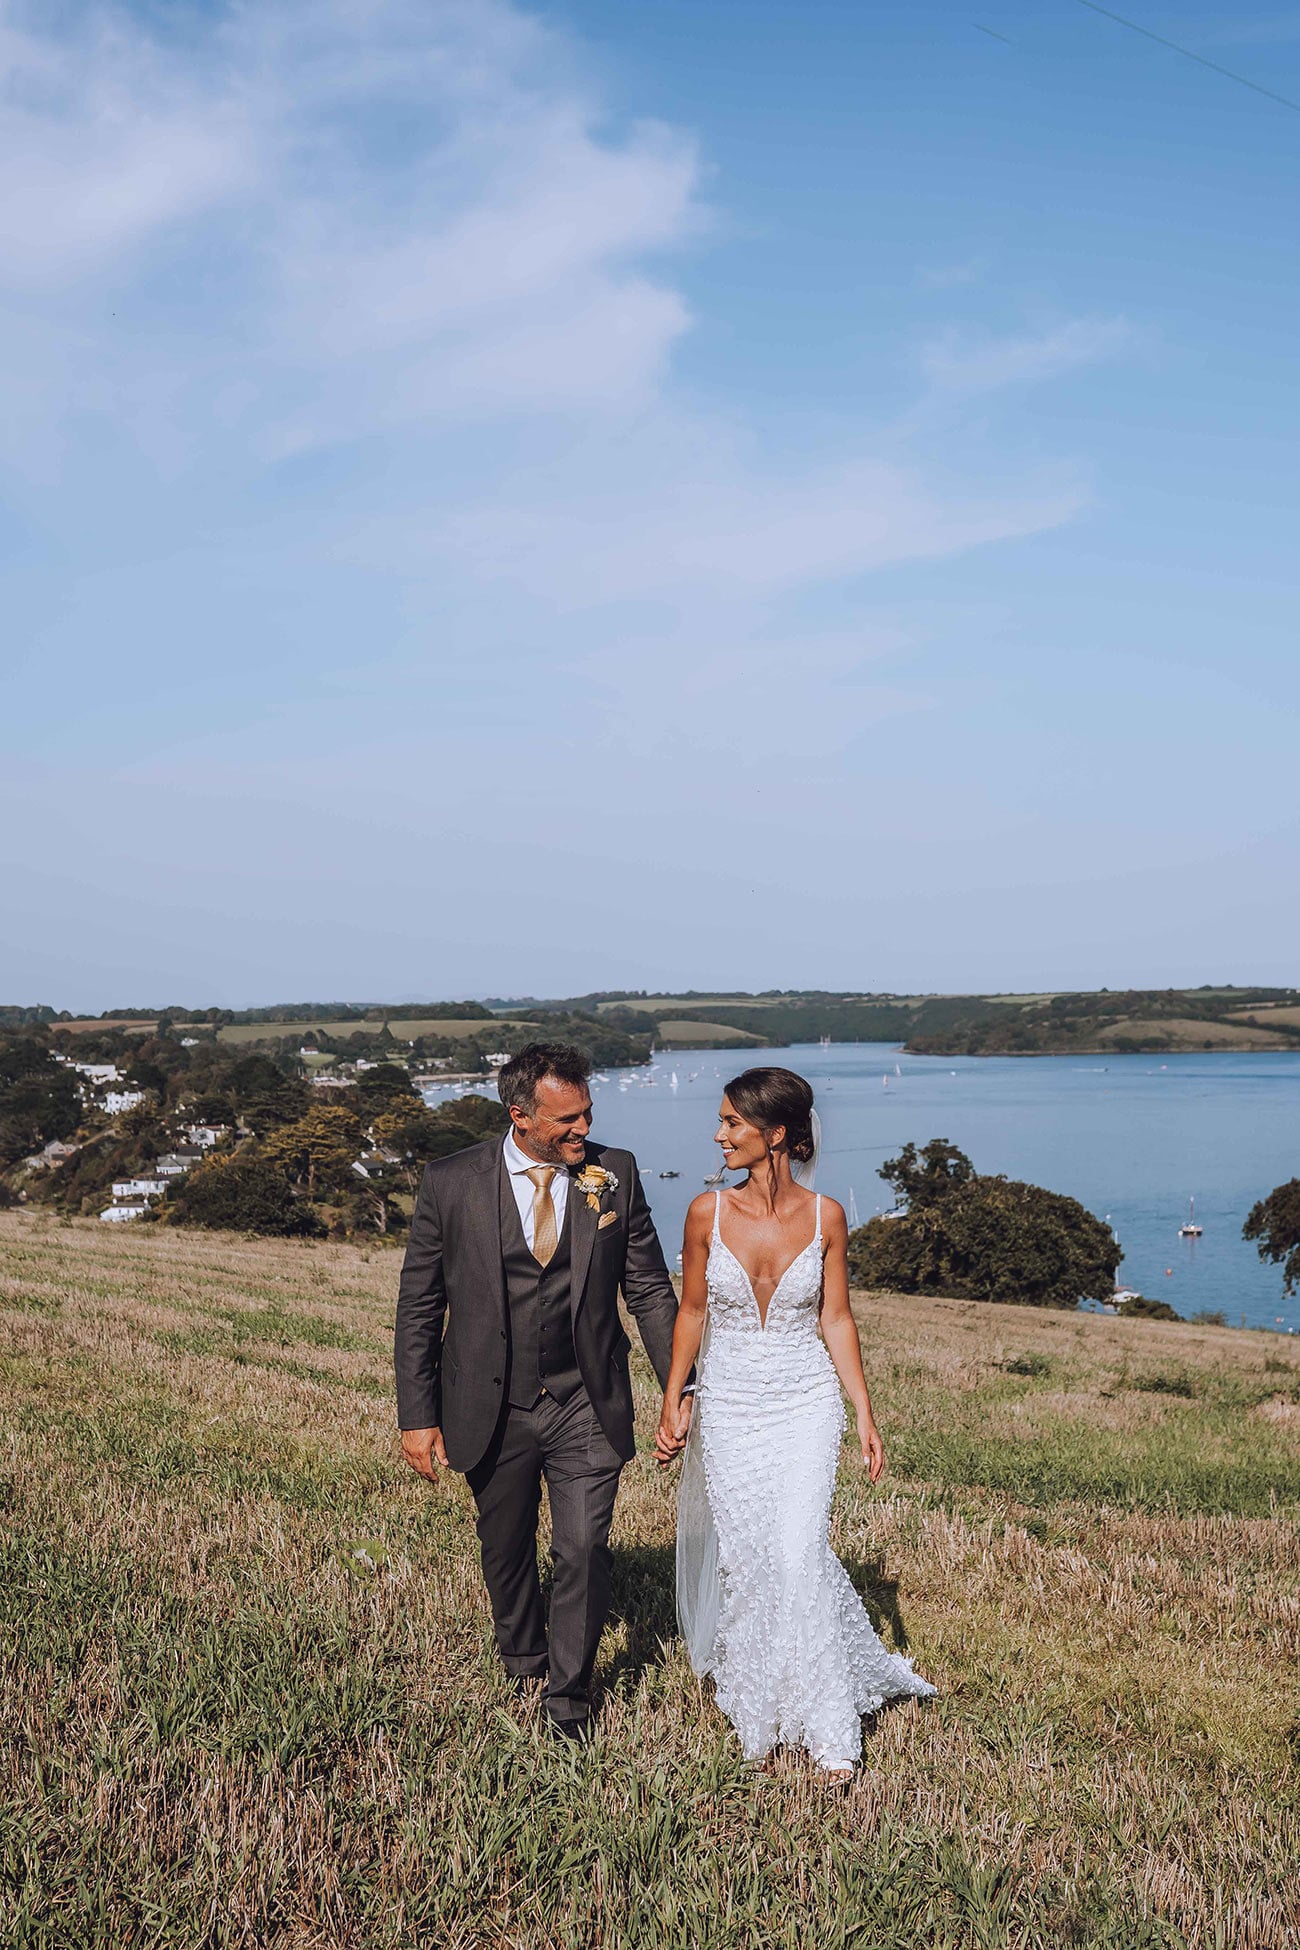 The bride and groom smiling, at each other, walk hand in hand across the field with a coastal backdrop behind 